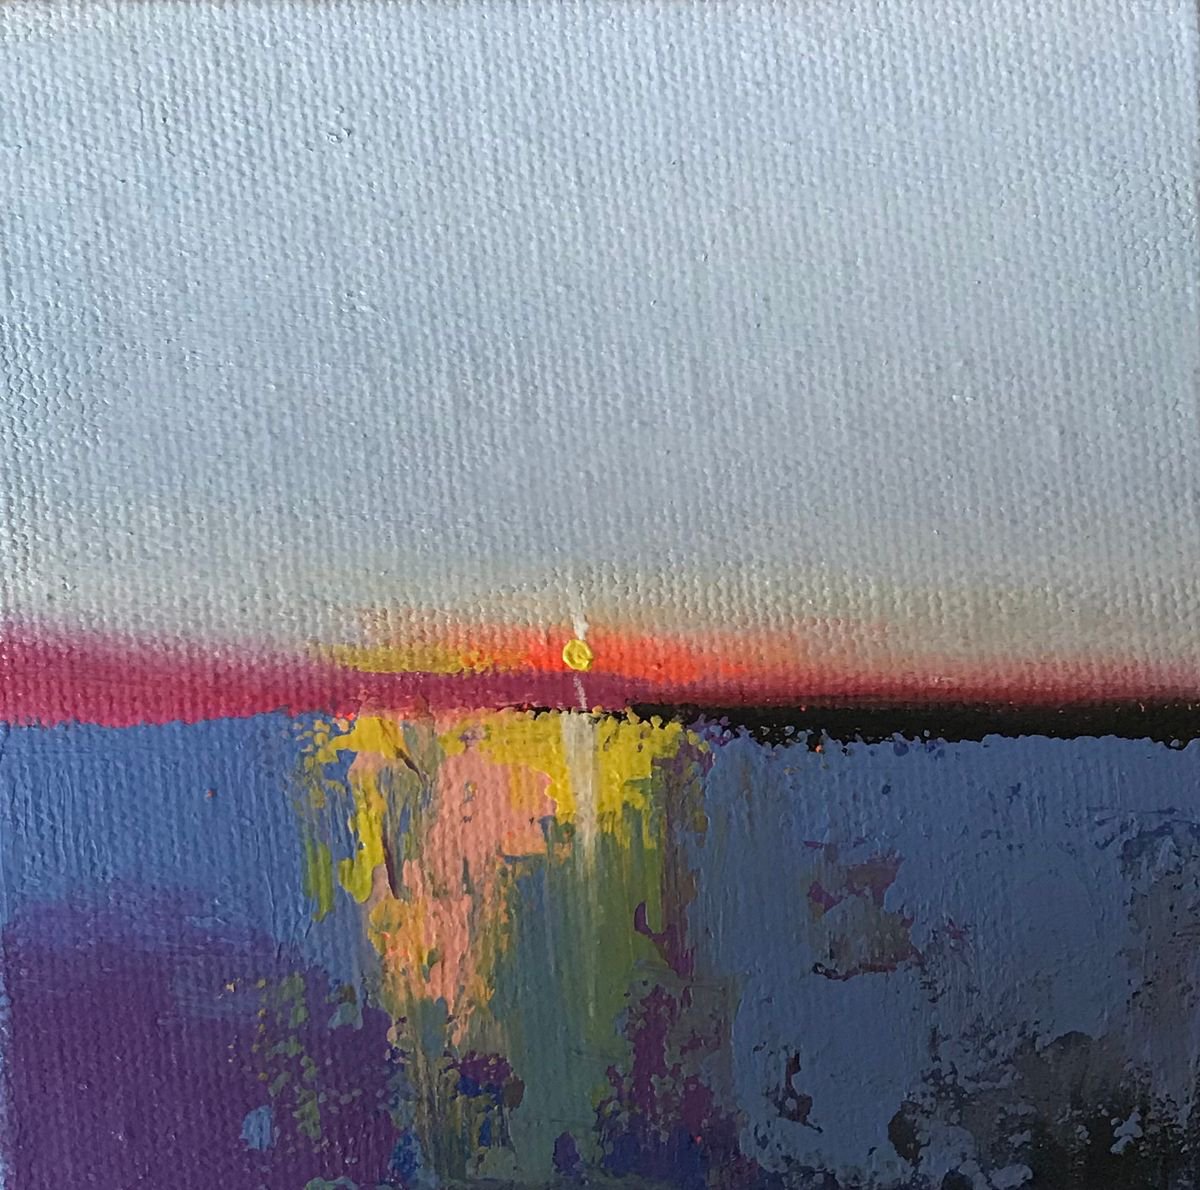 Abstract Sunset !! Miniature Landscape painting !! Office decor !! by Amita Dand